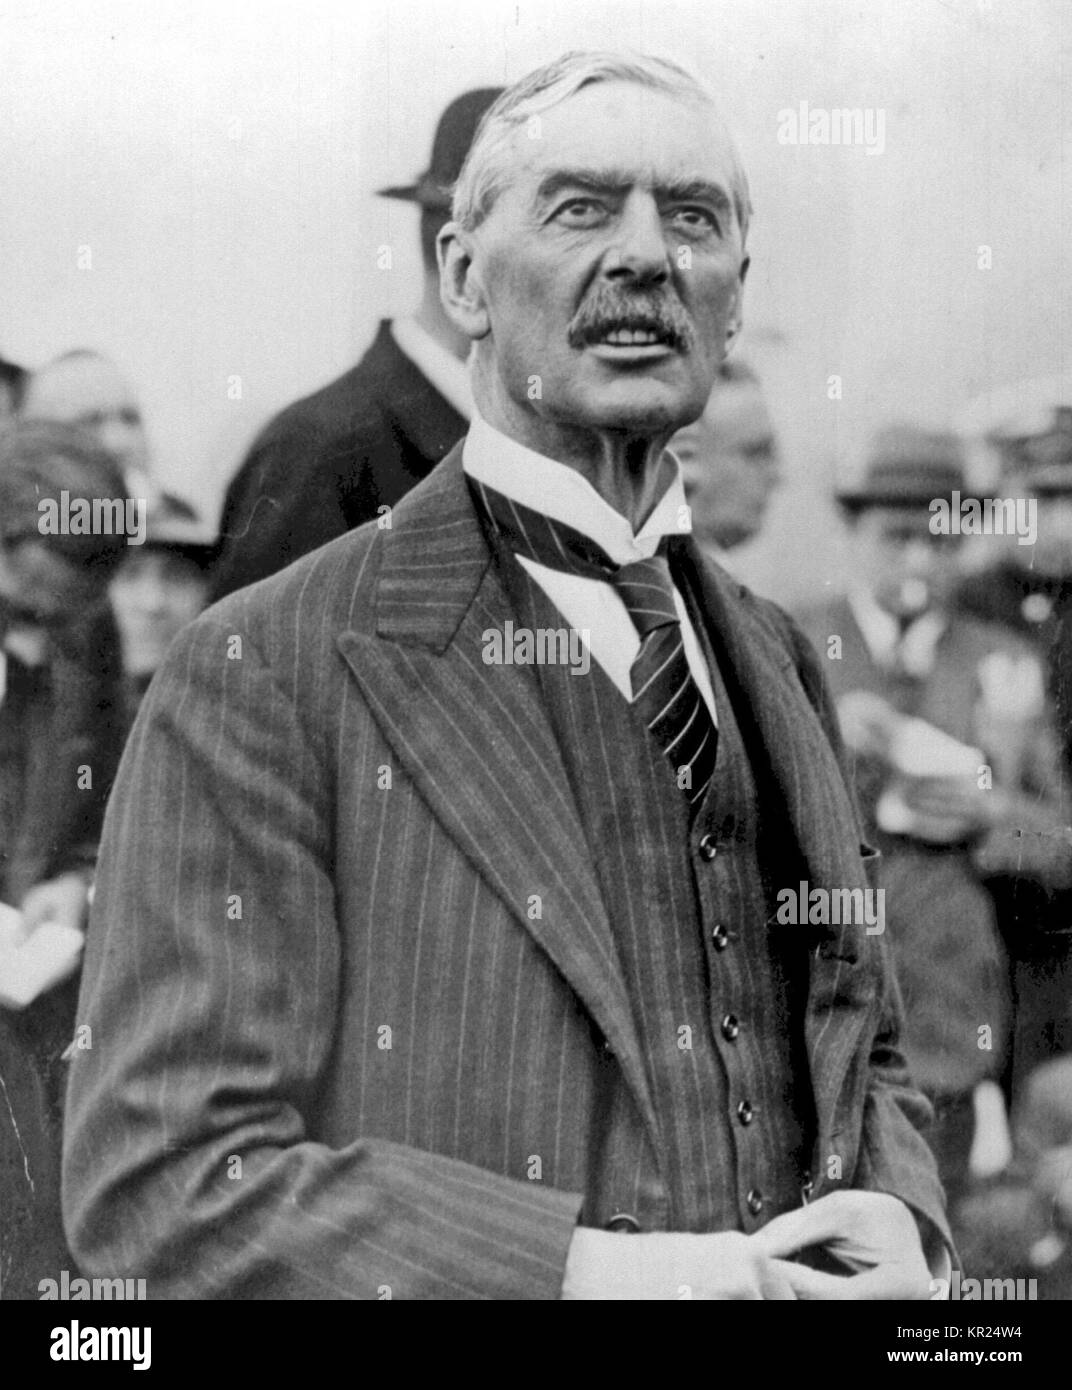 1938 Neville Chamberlain British Prime Minister Arrives At Oberwiesenfeld Airport Munich Germany On The Way To A Meeting With German Fuhrer Adolf Hitler To Discuss German Threats To Invade Czechoslovakia 28 September